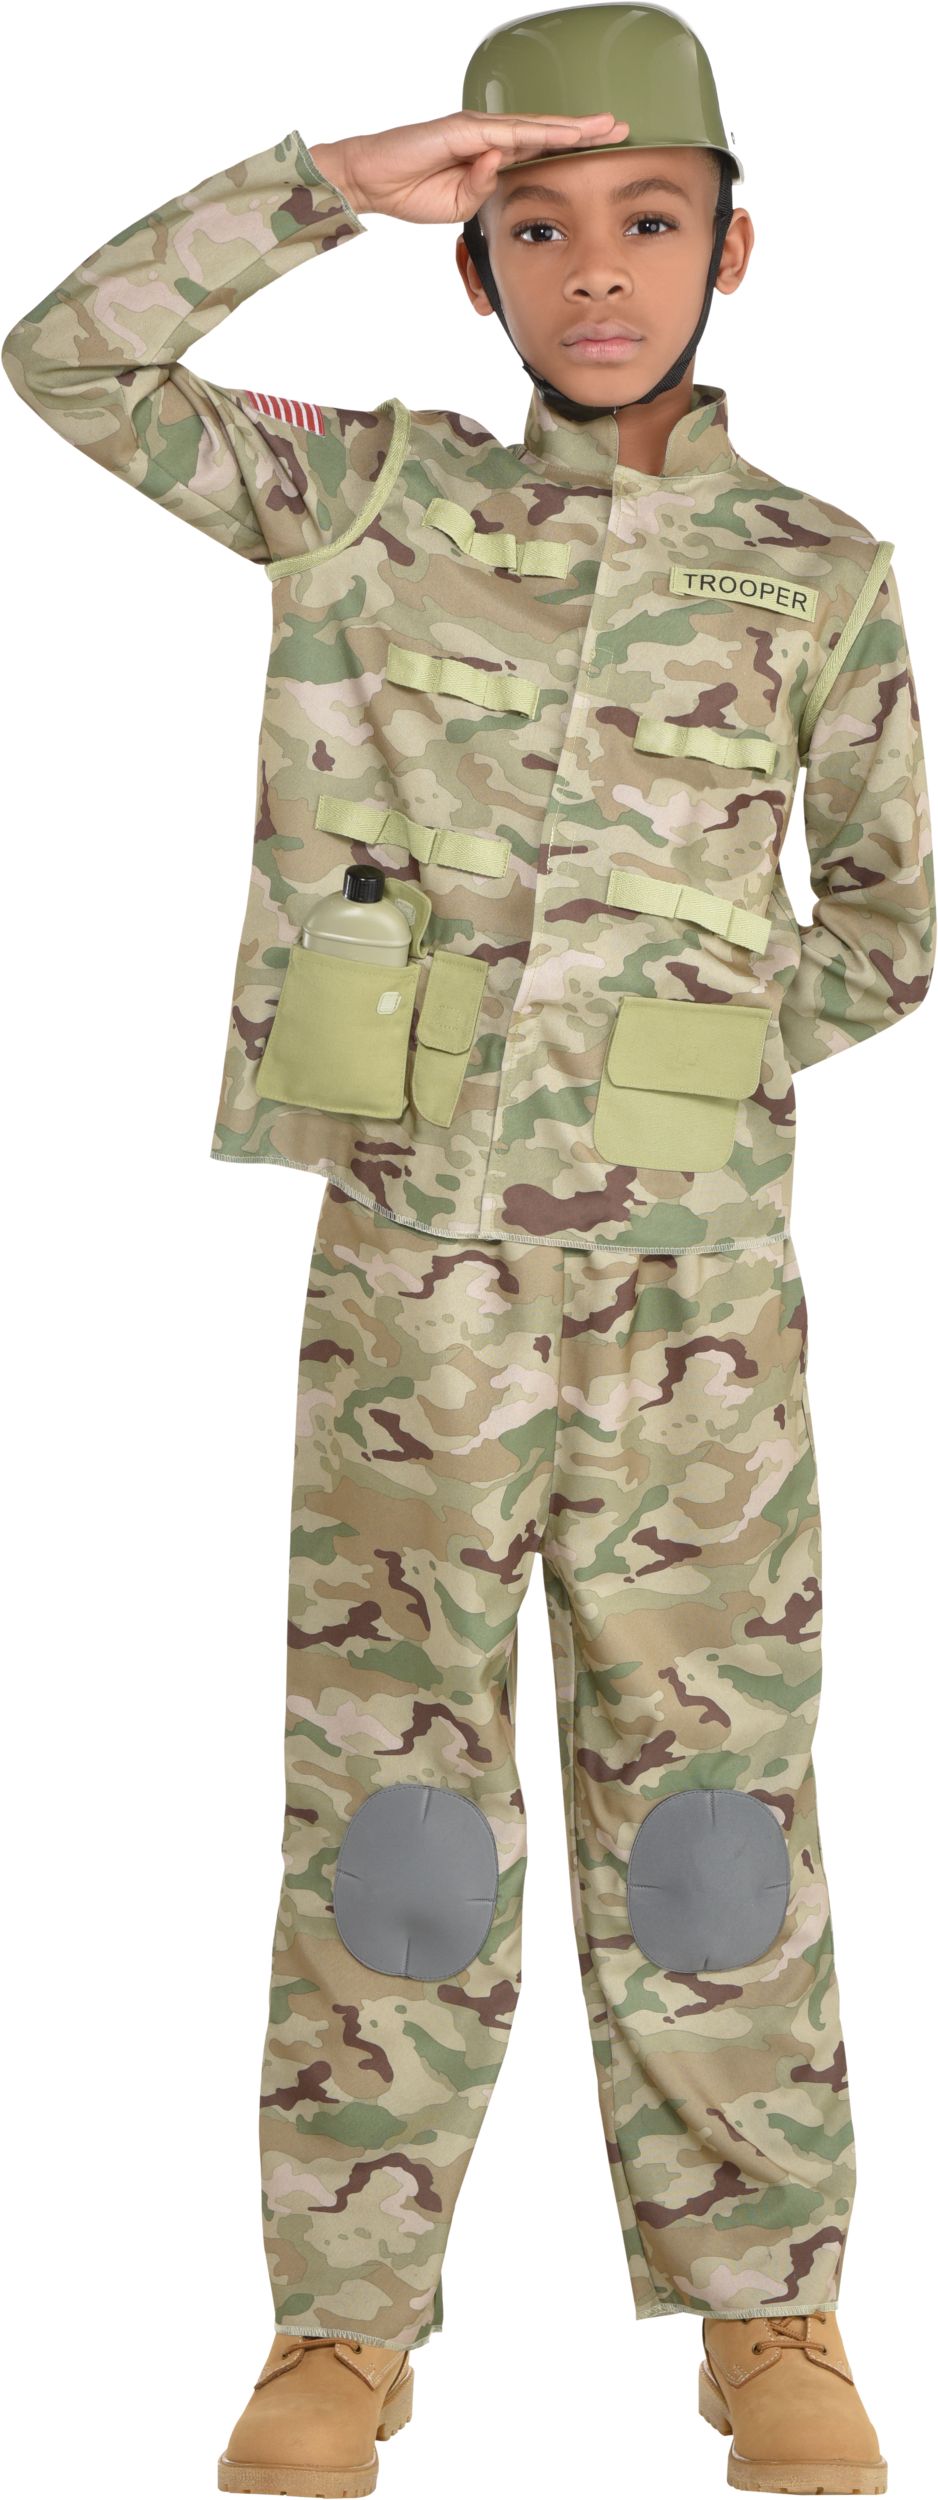 Child Boys KIDS ARMY SOLDIER COSTUME Fancy Dress Party Uniform Military  Outfit